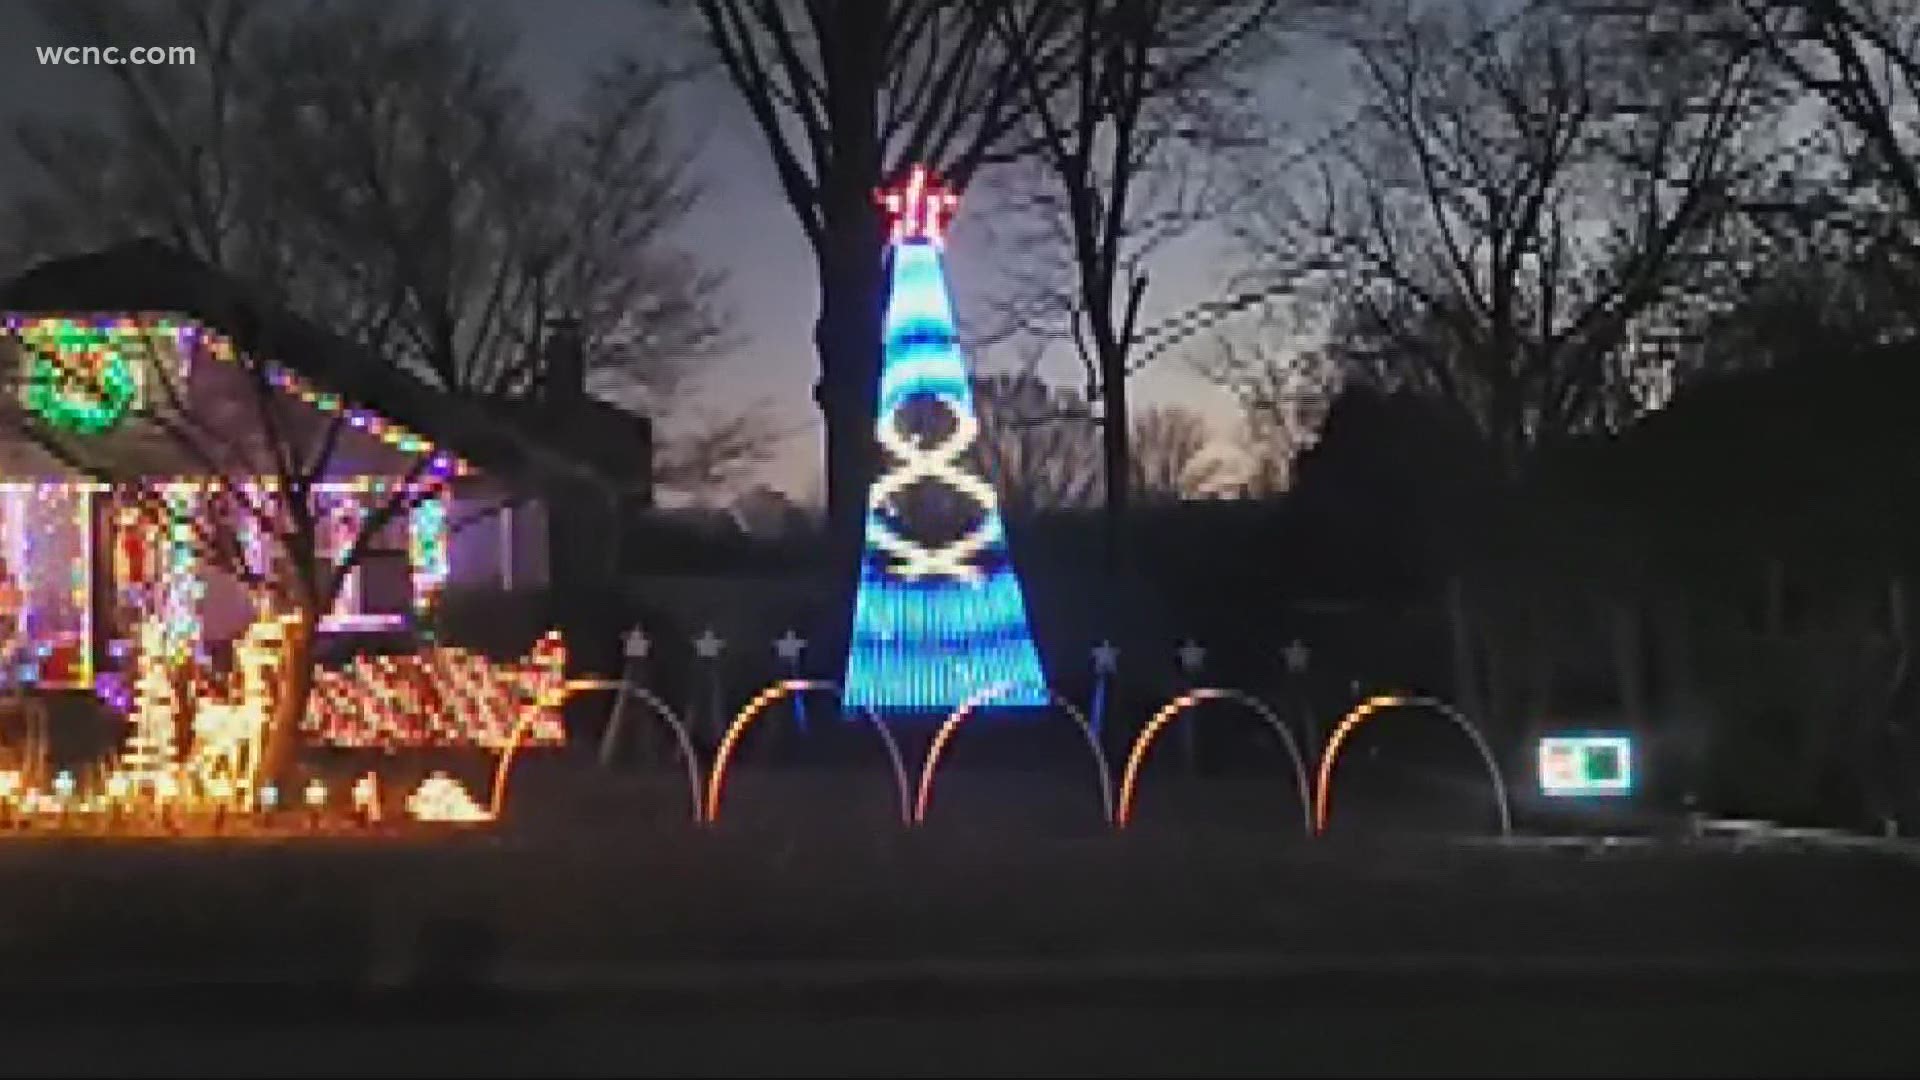 From Netwon to Concord, Matthews and Huntersville, there are some incredible holiday light displays to check out this season.